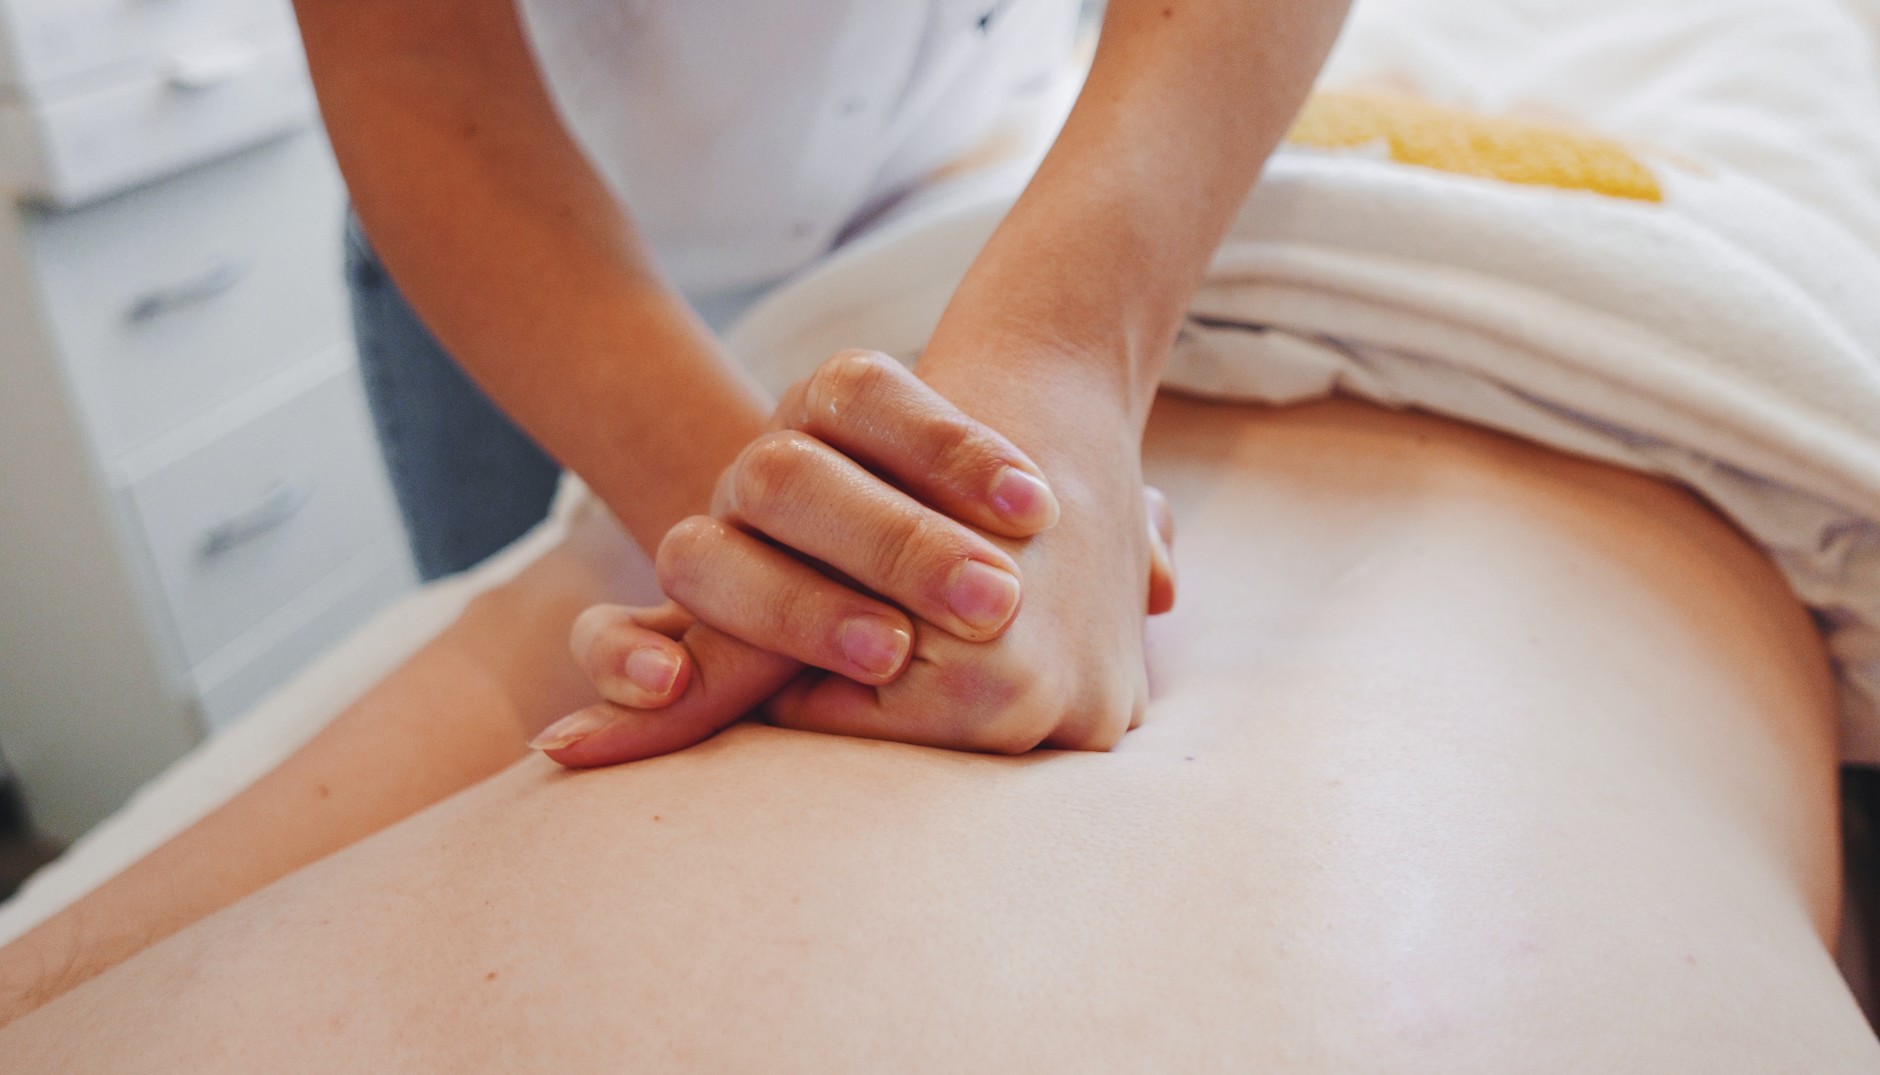 hands-of-masseuse-massaging-a-mans-back-chiropractor-working-on-patients-dealing-with-back-pain-as_t20_7mX8OO